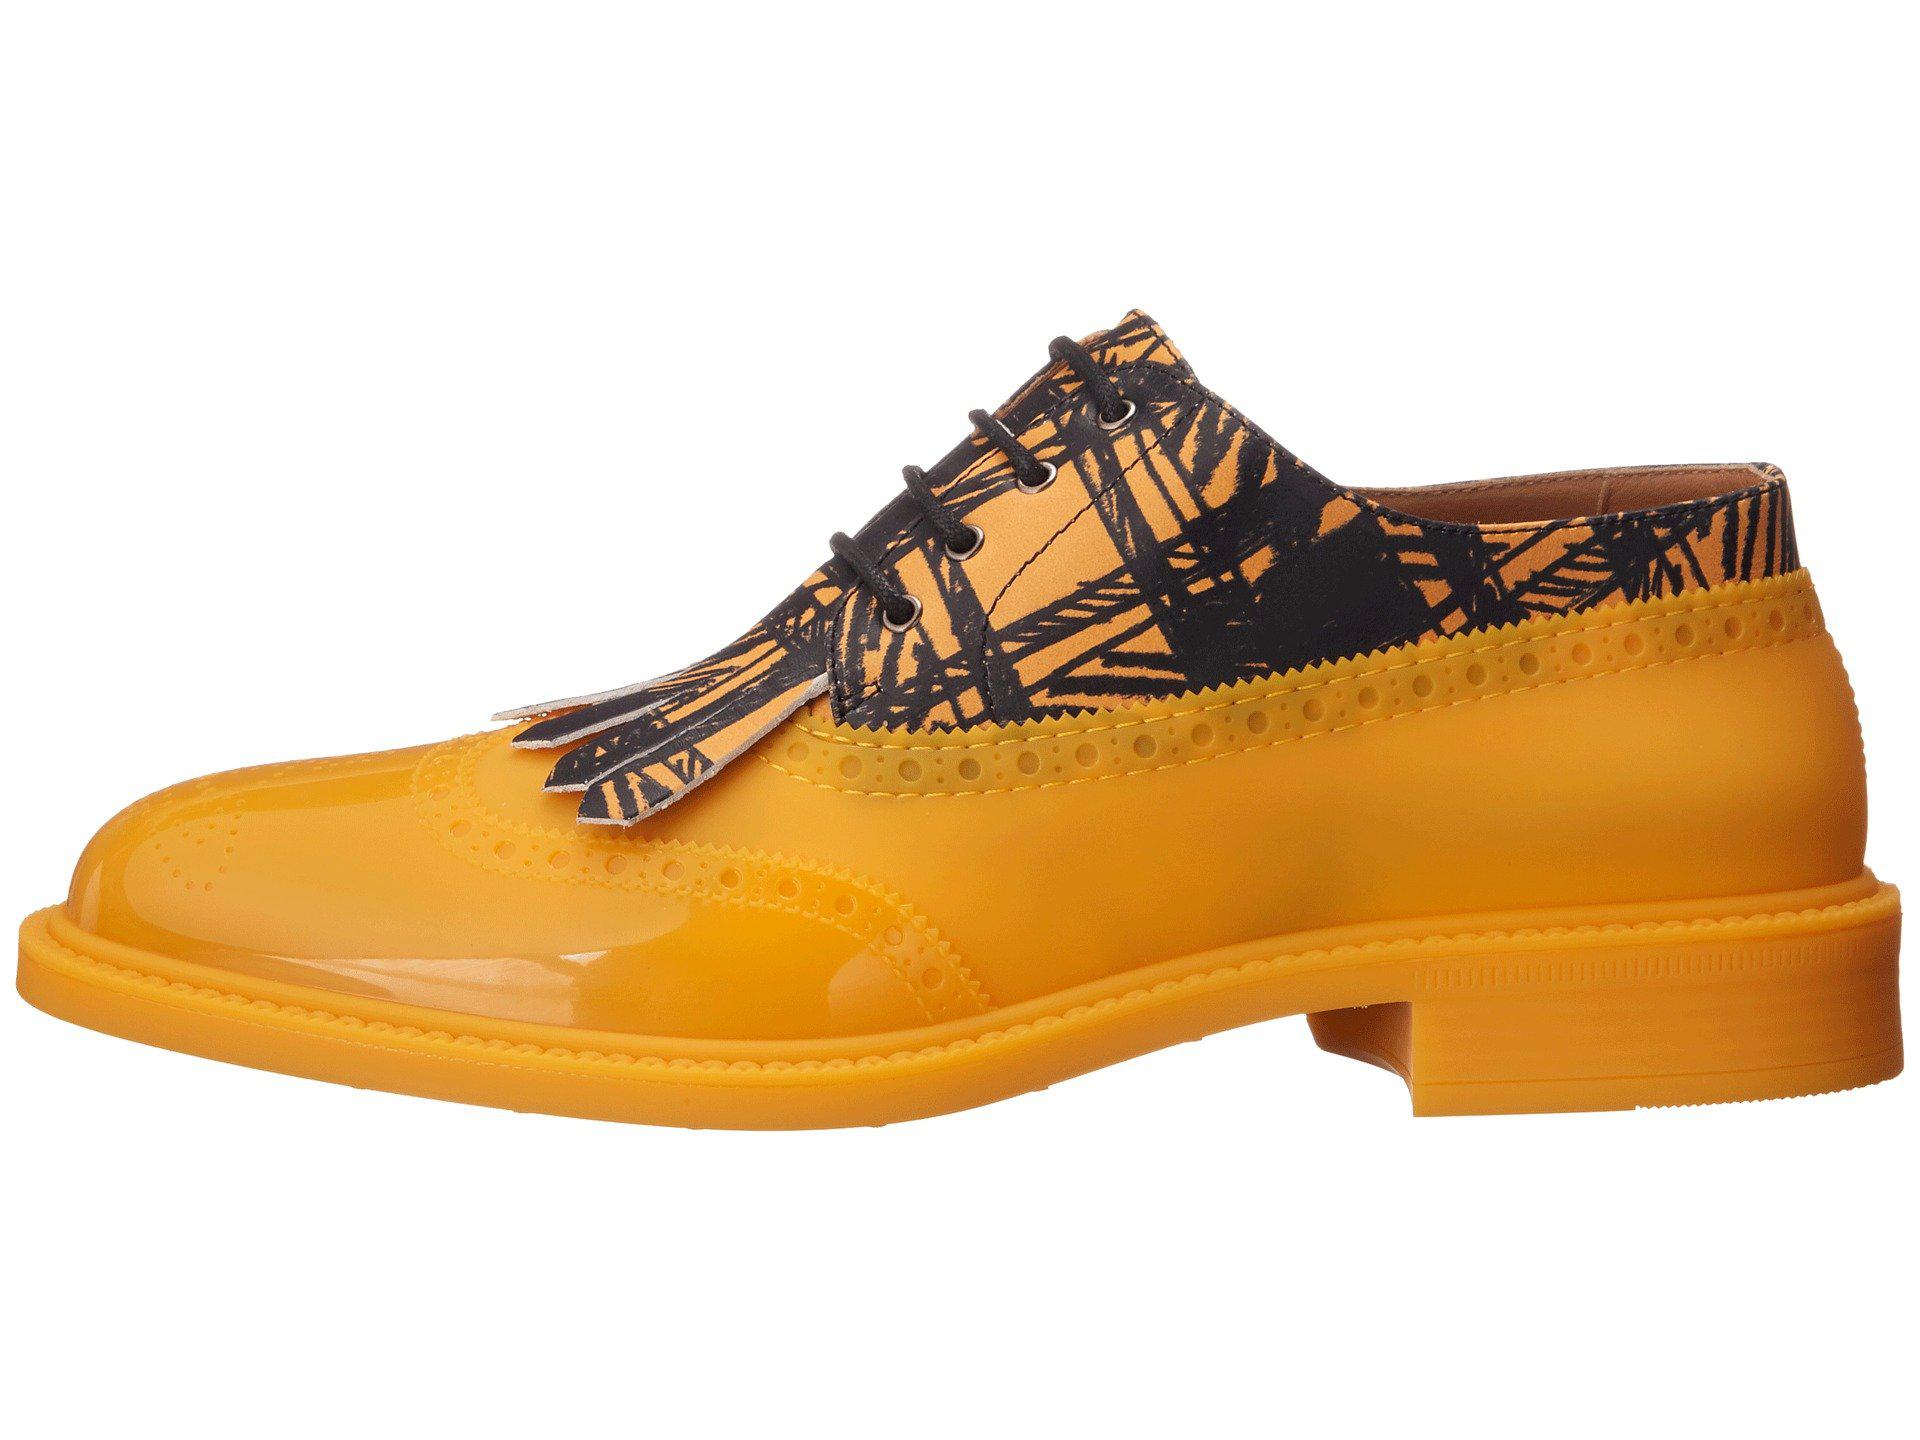 Vivienne Westwood Lace-up Brogue in Yellow for Men - Lyst